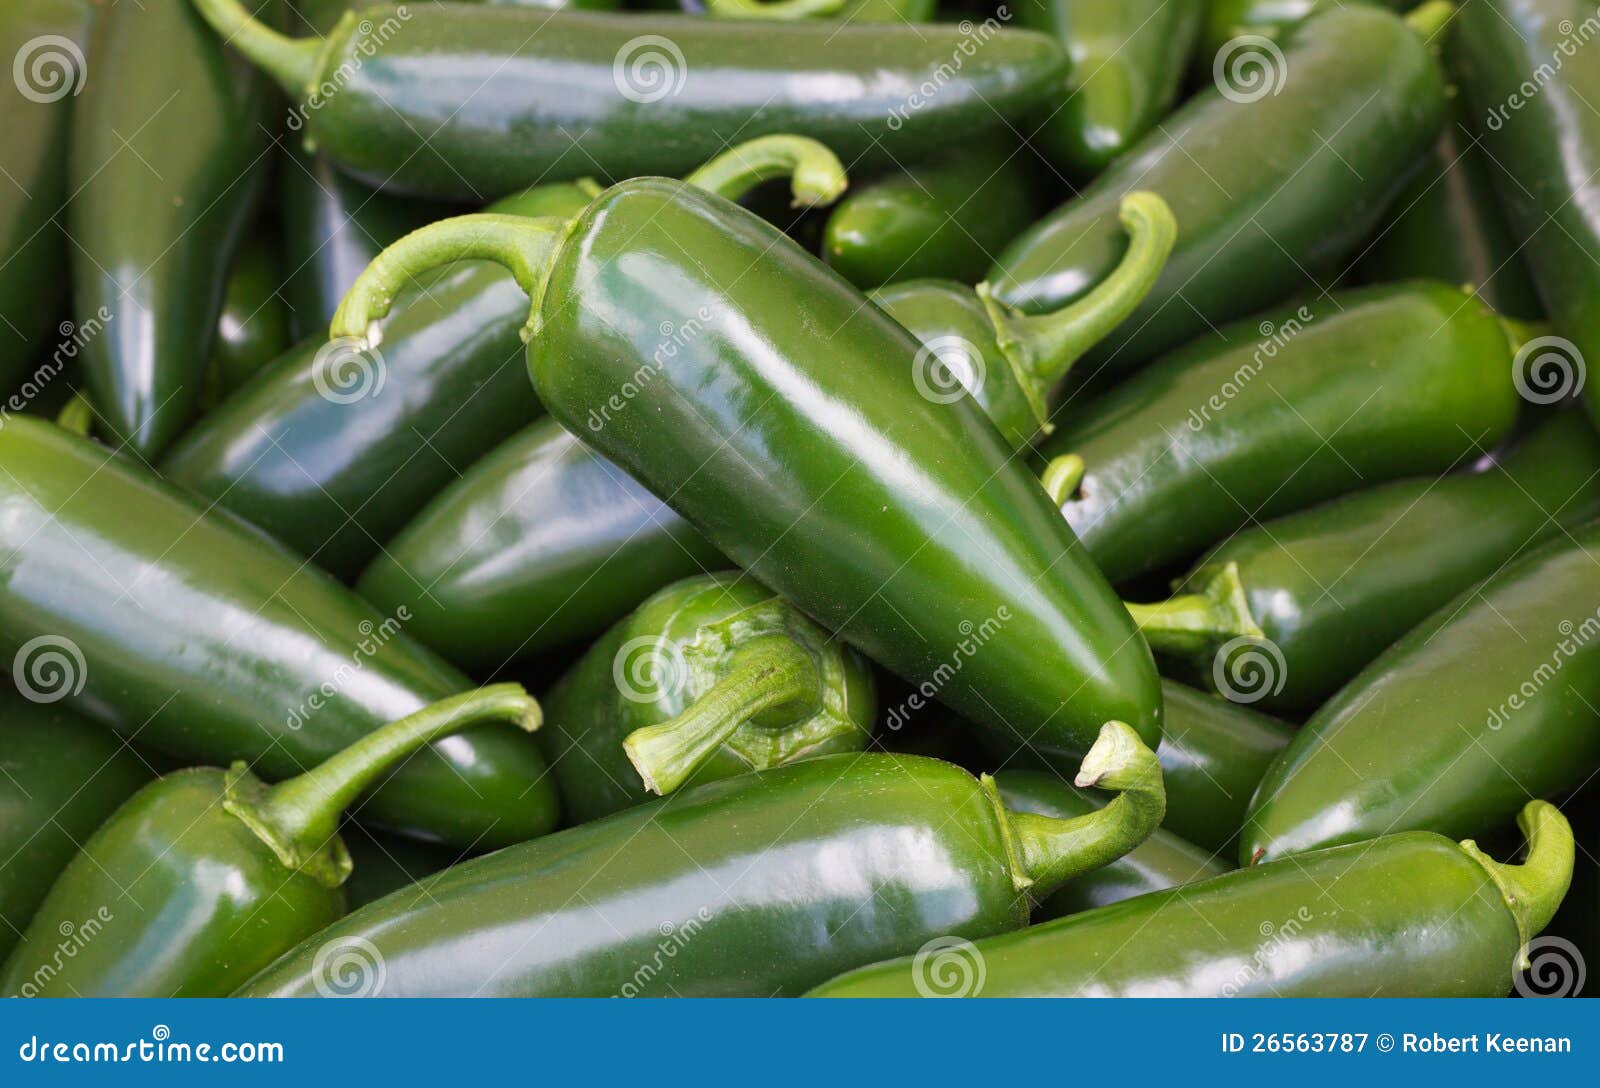 bright green jalapeno peppers